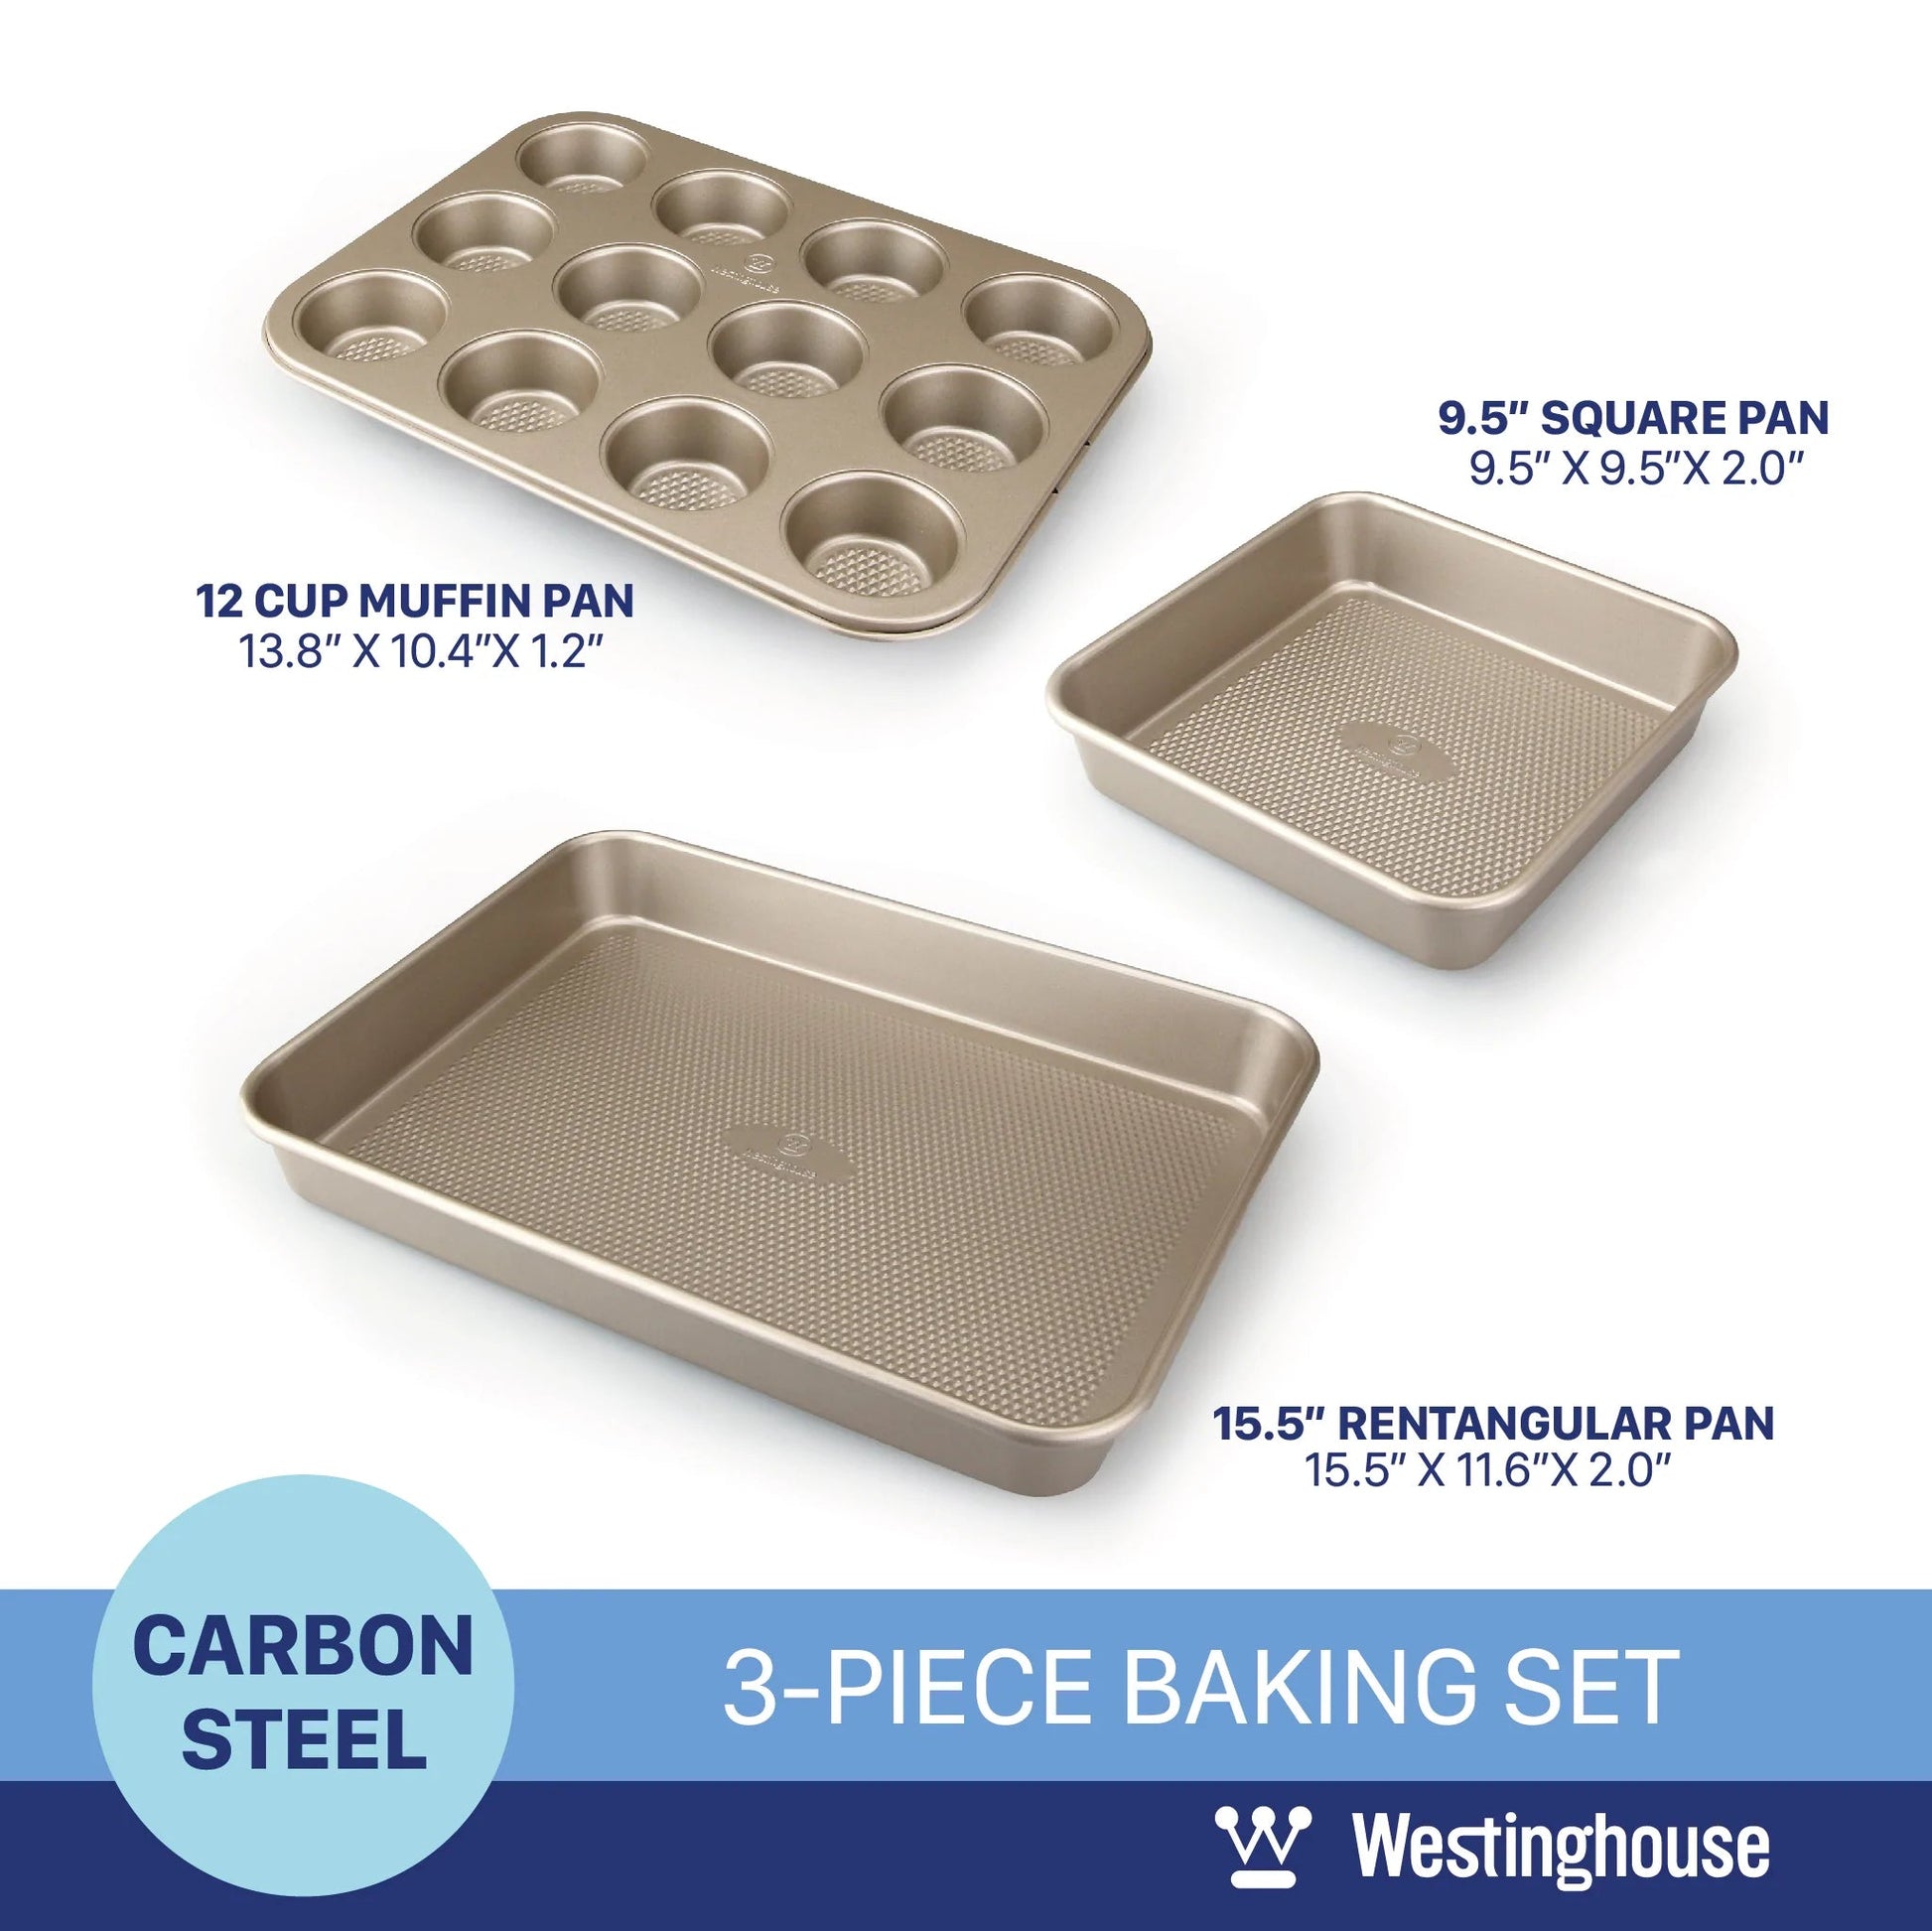 https://kitchenoasis.com/cdn/shop/files/Westinghouse-3-Piece-Carbon-Steel-Premium-Non-stick-Baking-Pan-Set-With-Square-Pan-Muffin-Tray-and-Rectangular-Deep-Tray-2.webp?v=1685842127&width=1946